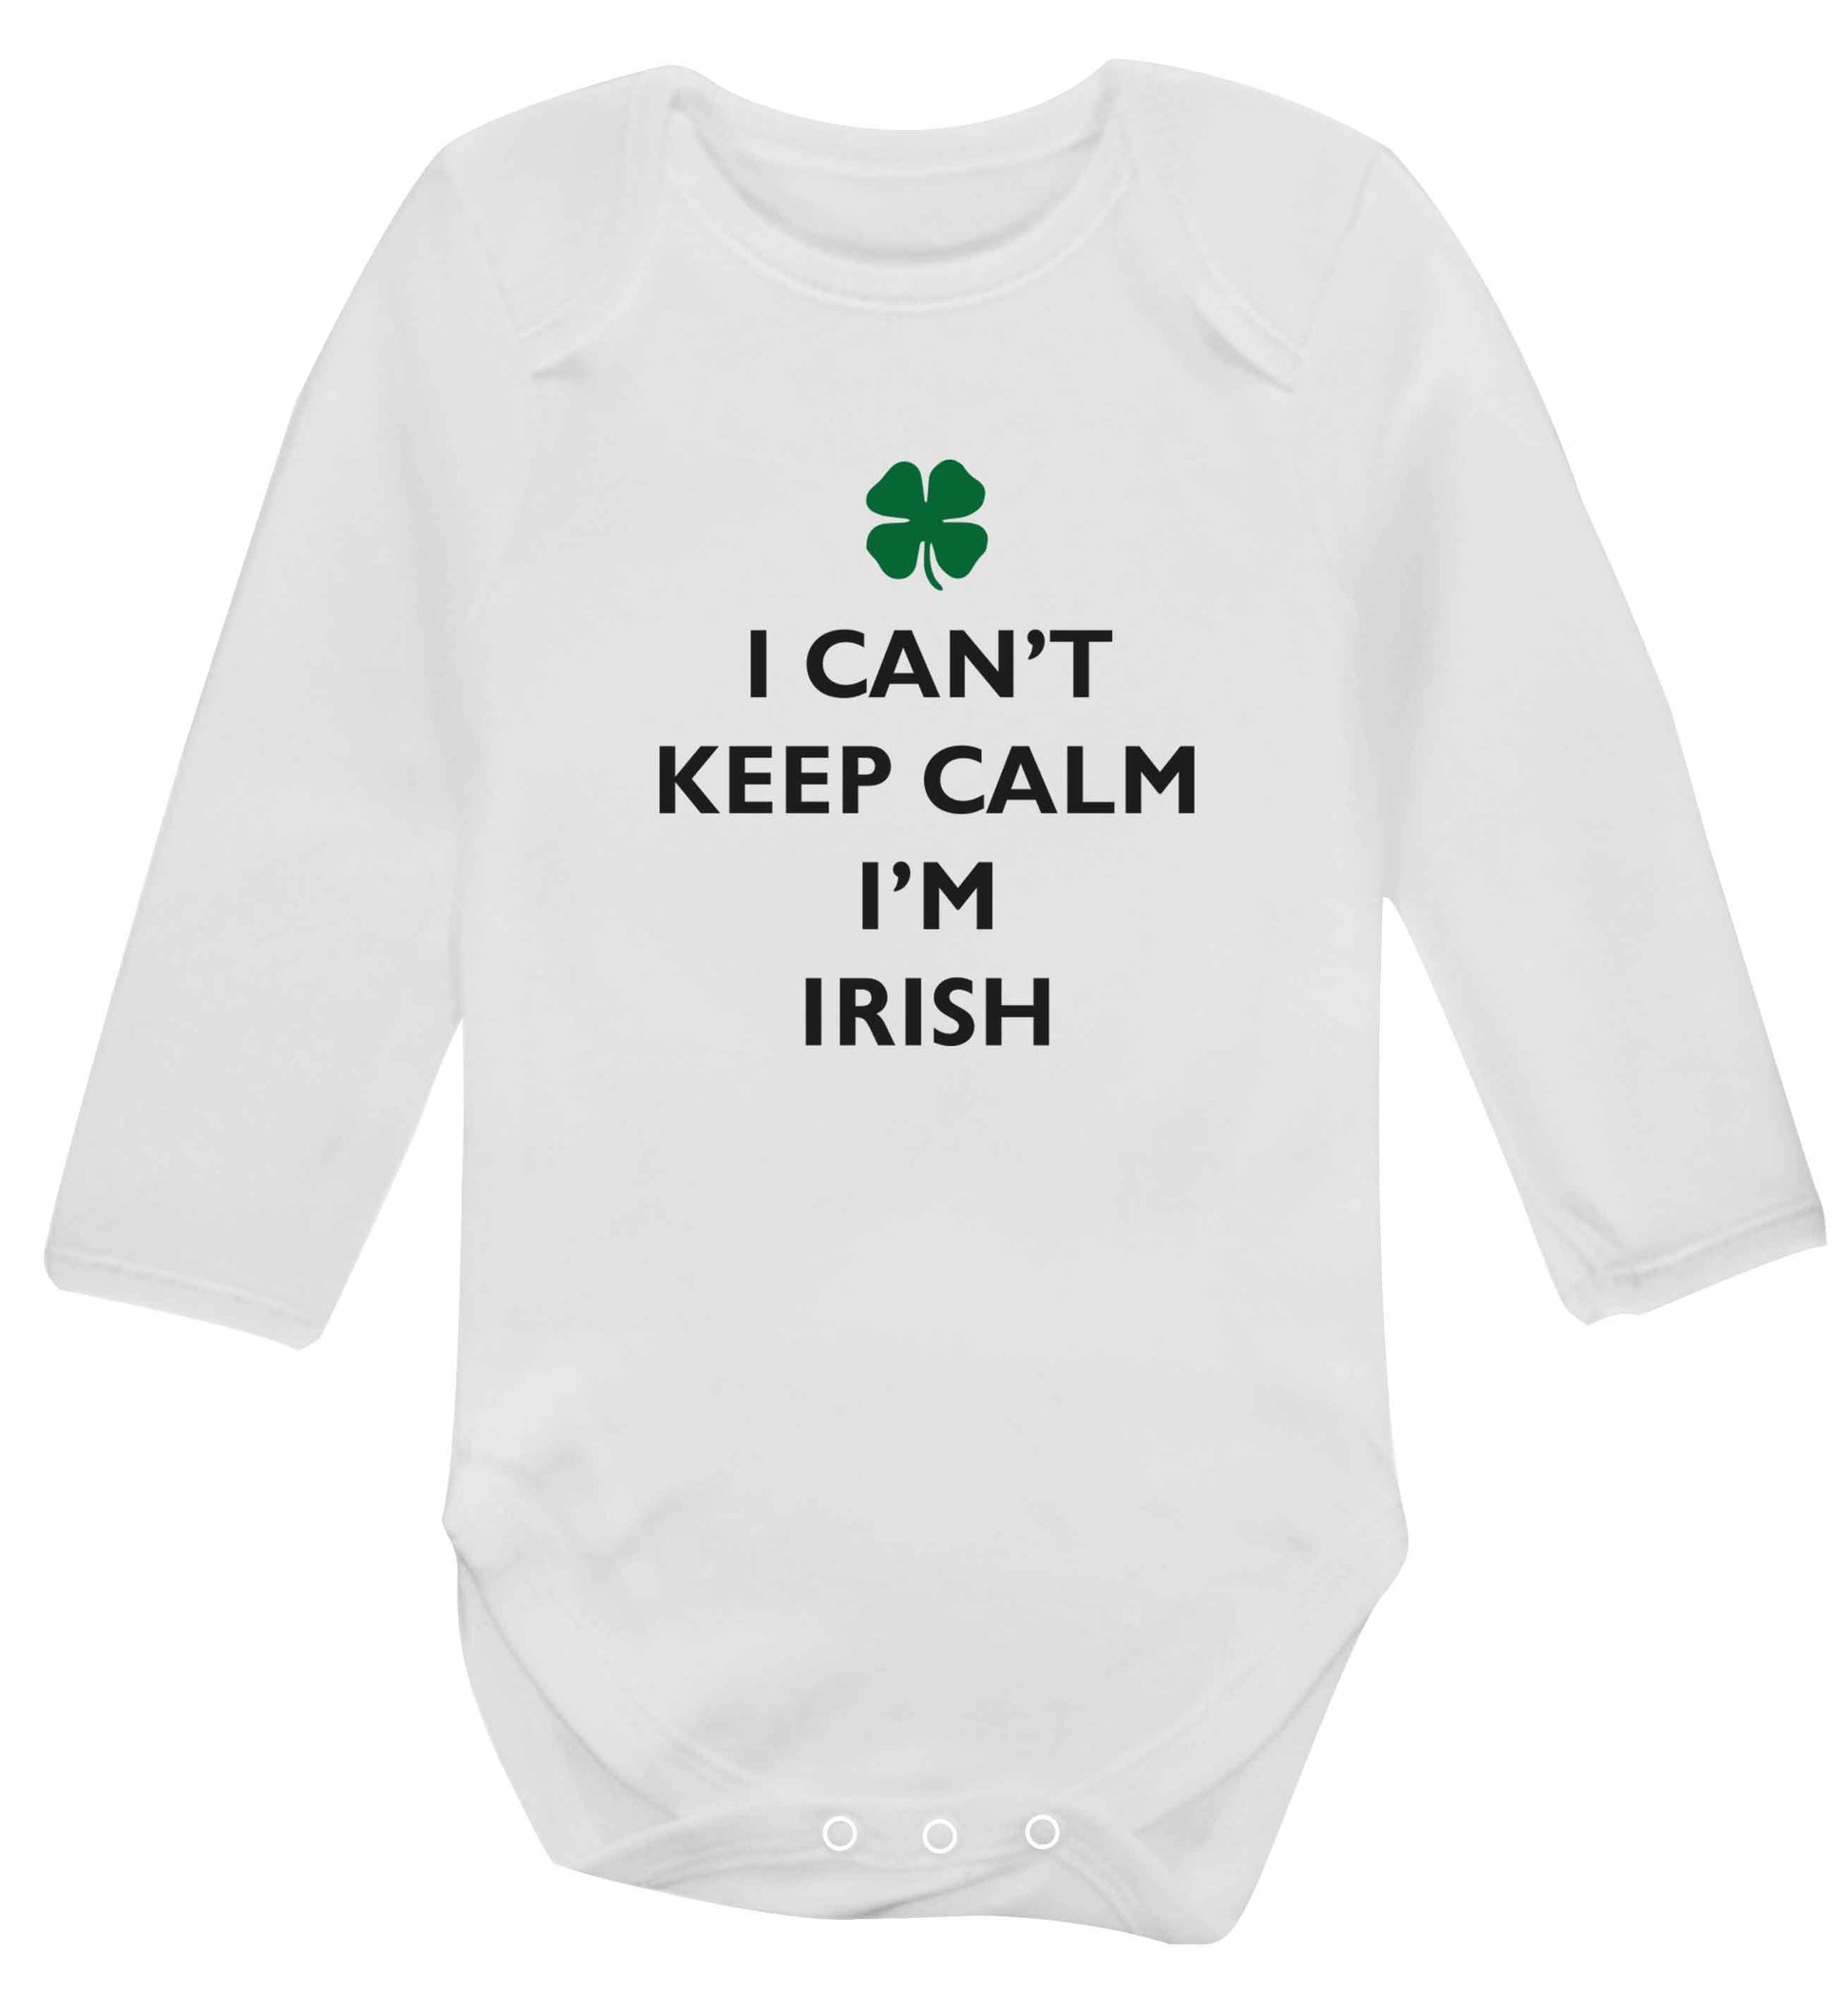 I can't keep calm I'm Irish baby vest long sleeved white 6-12 months